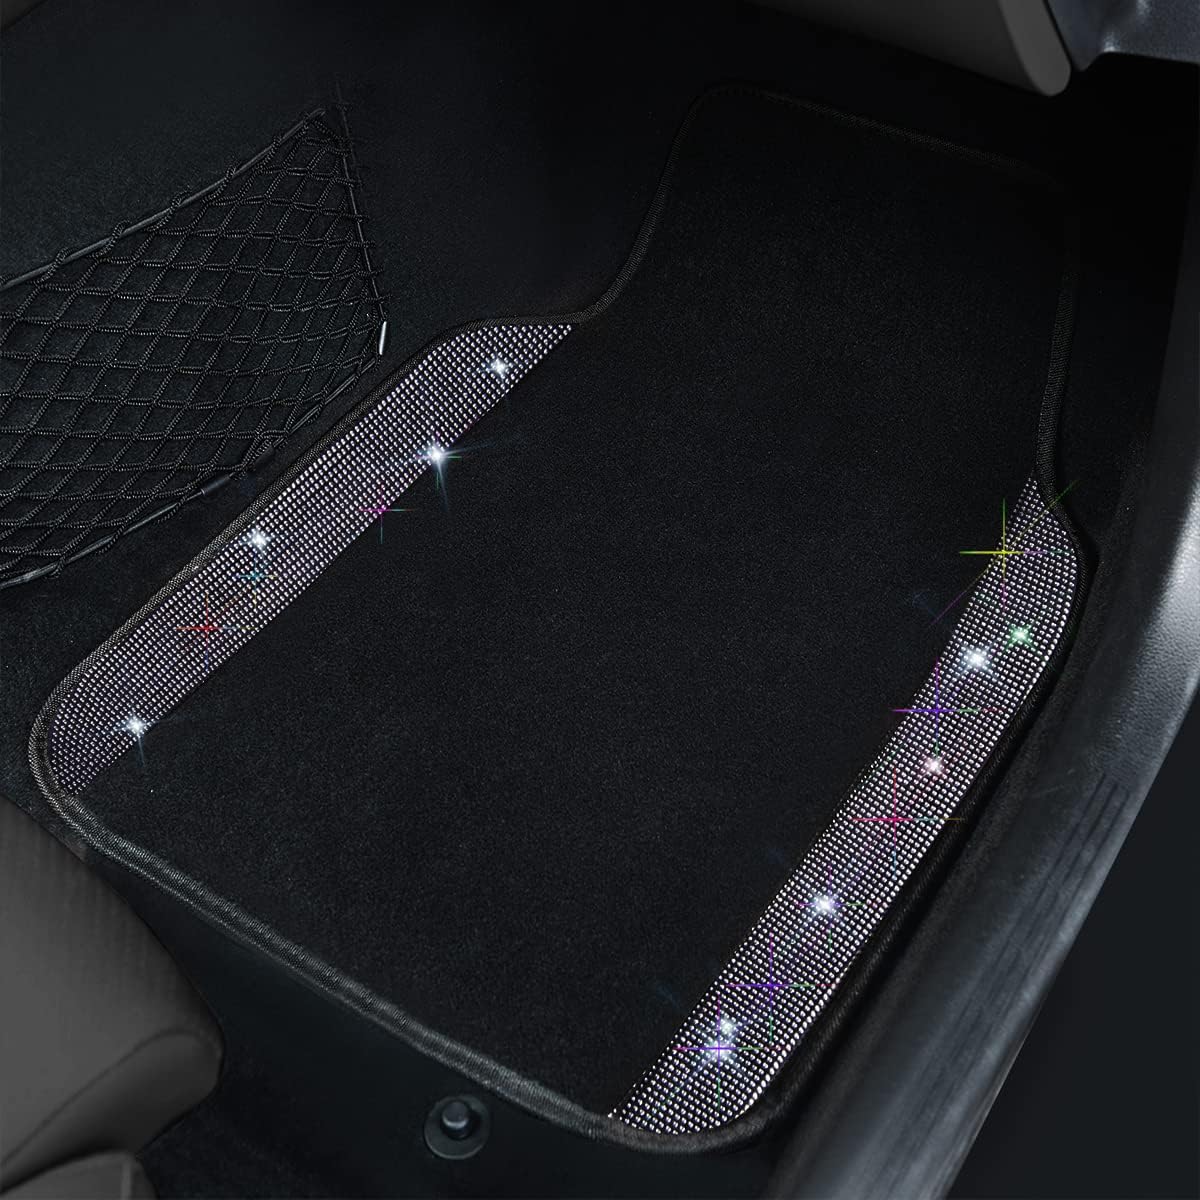 CAR PASS Shining Rhinestones Carpet, Bling Crystal Diamond Sparkly Glitter Car Floor Mats, Car Seat Covers, Shining Rhinestone Diamond Waterproof Faux Leather Two Front,Silver